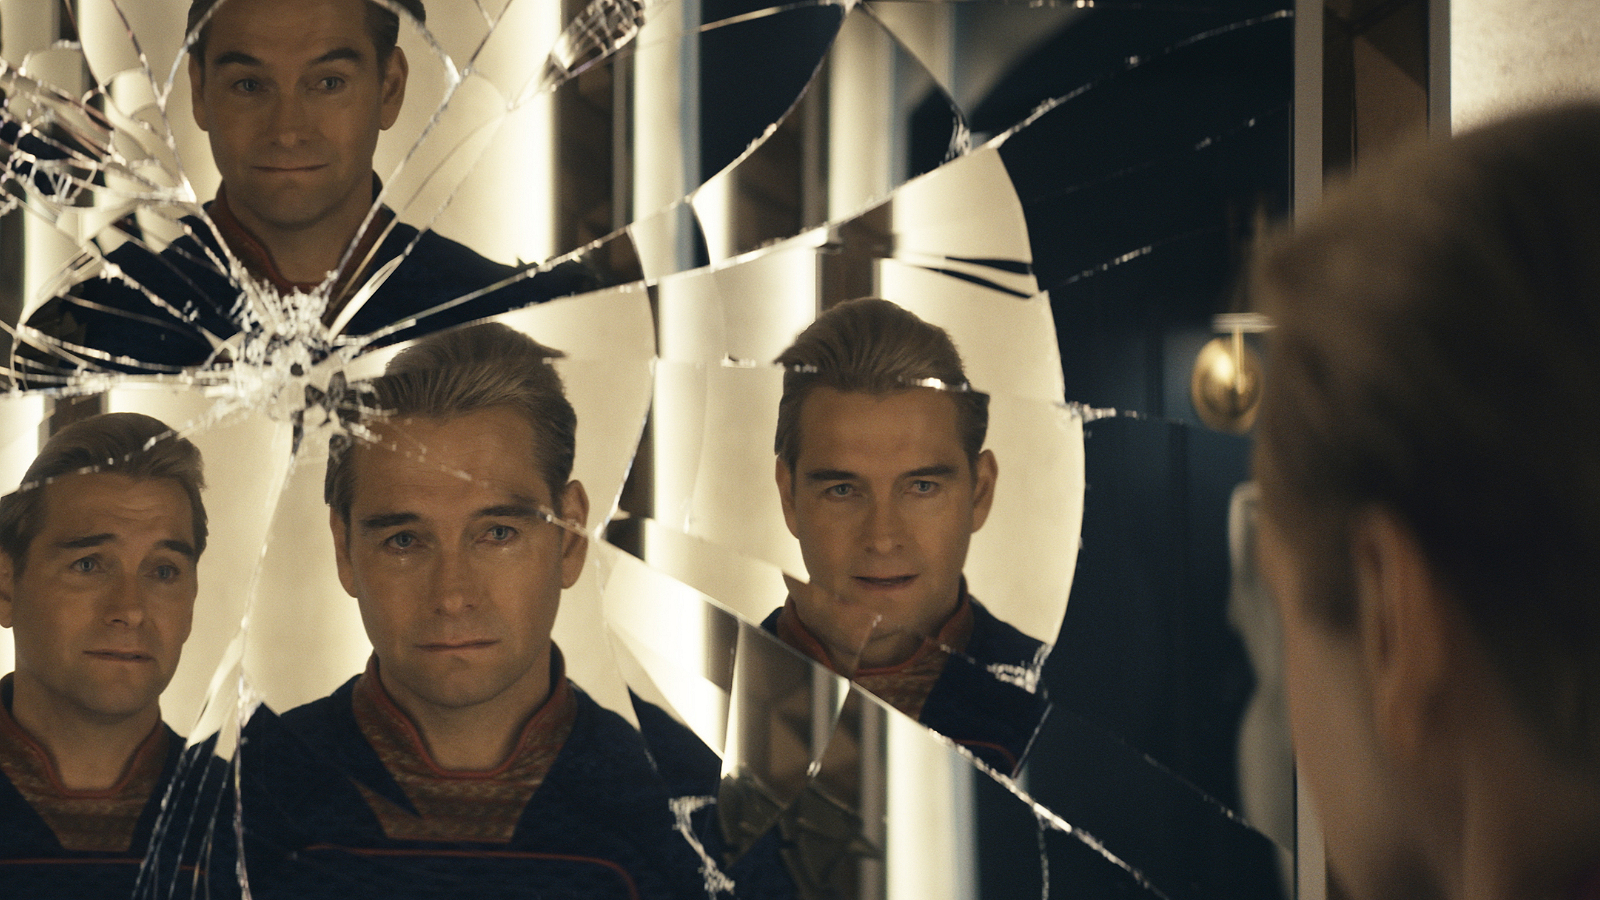 Homelander staring at a cracked mirror with multiple reflections in The Boys Season 4